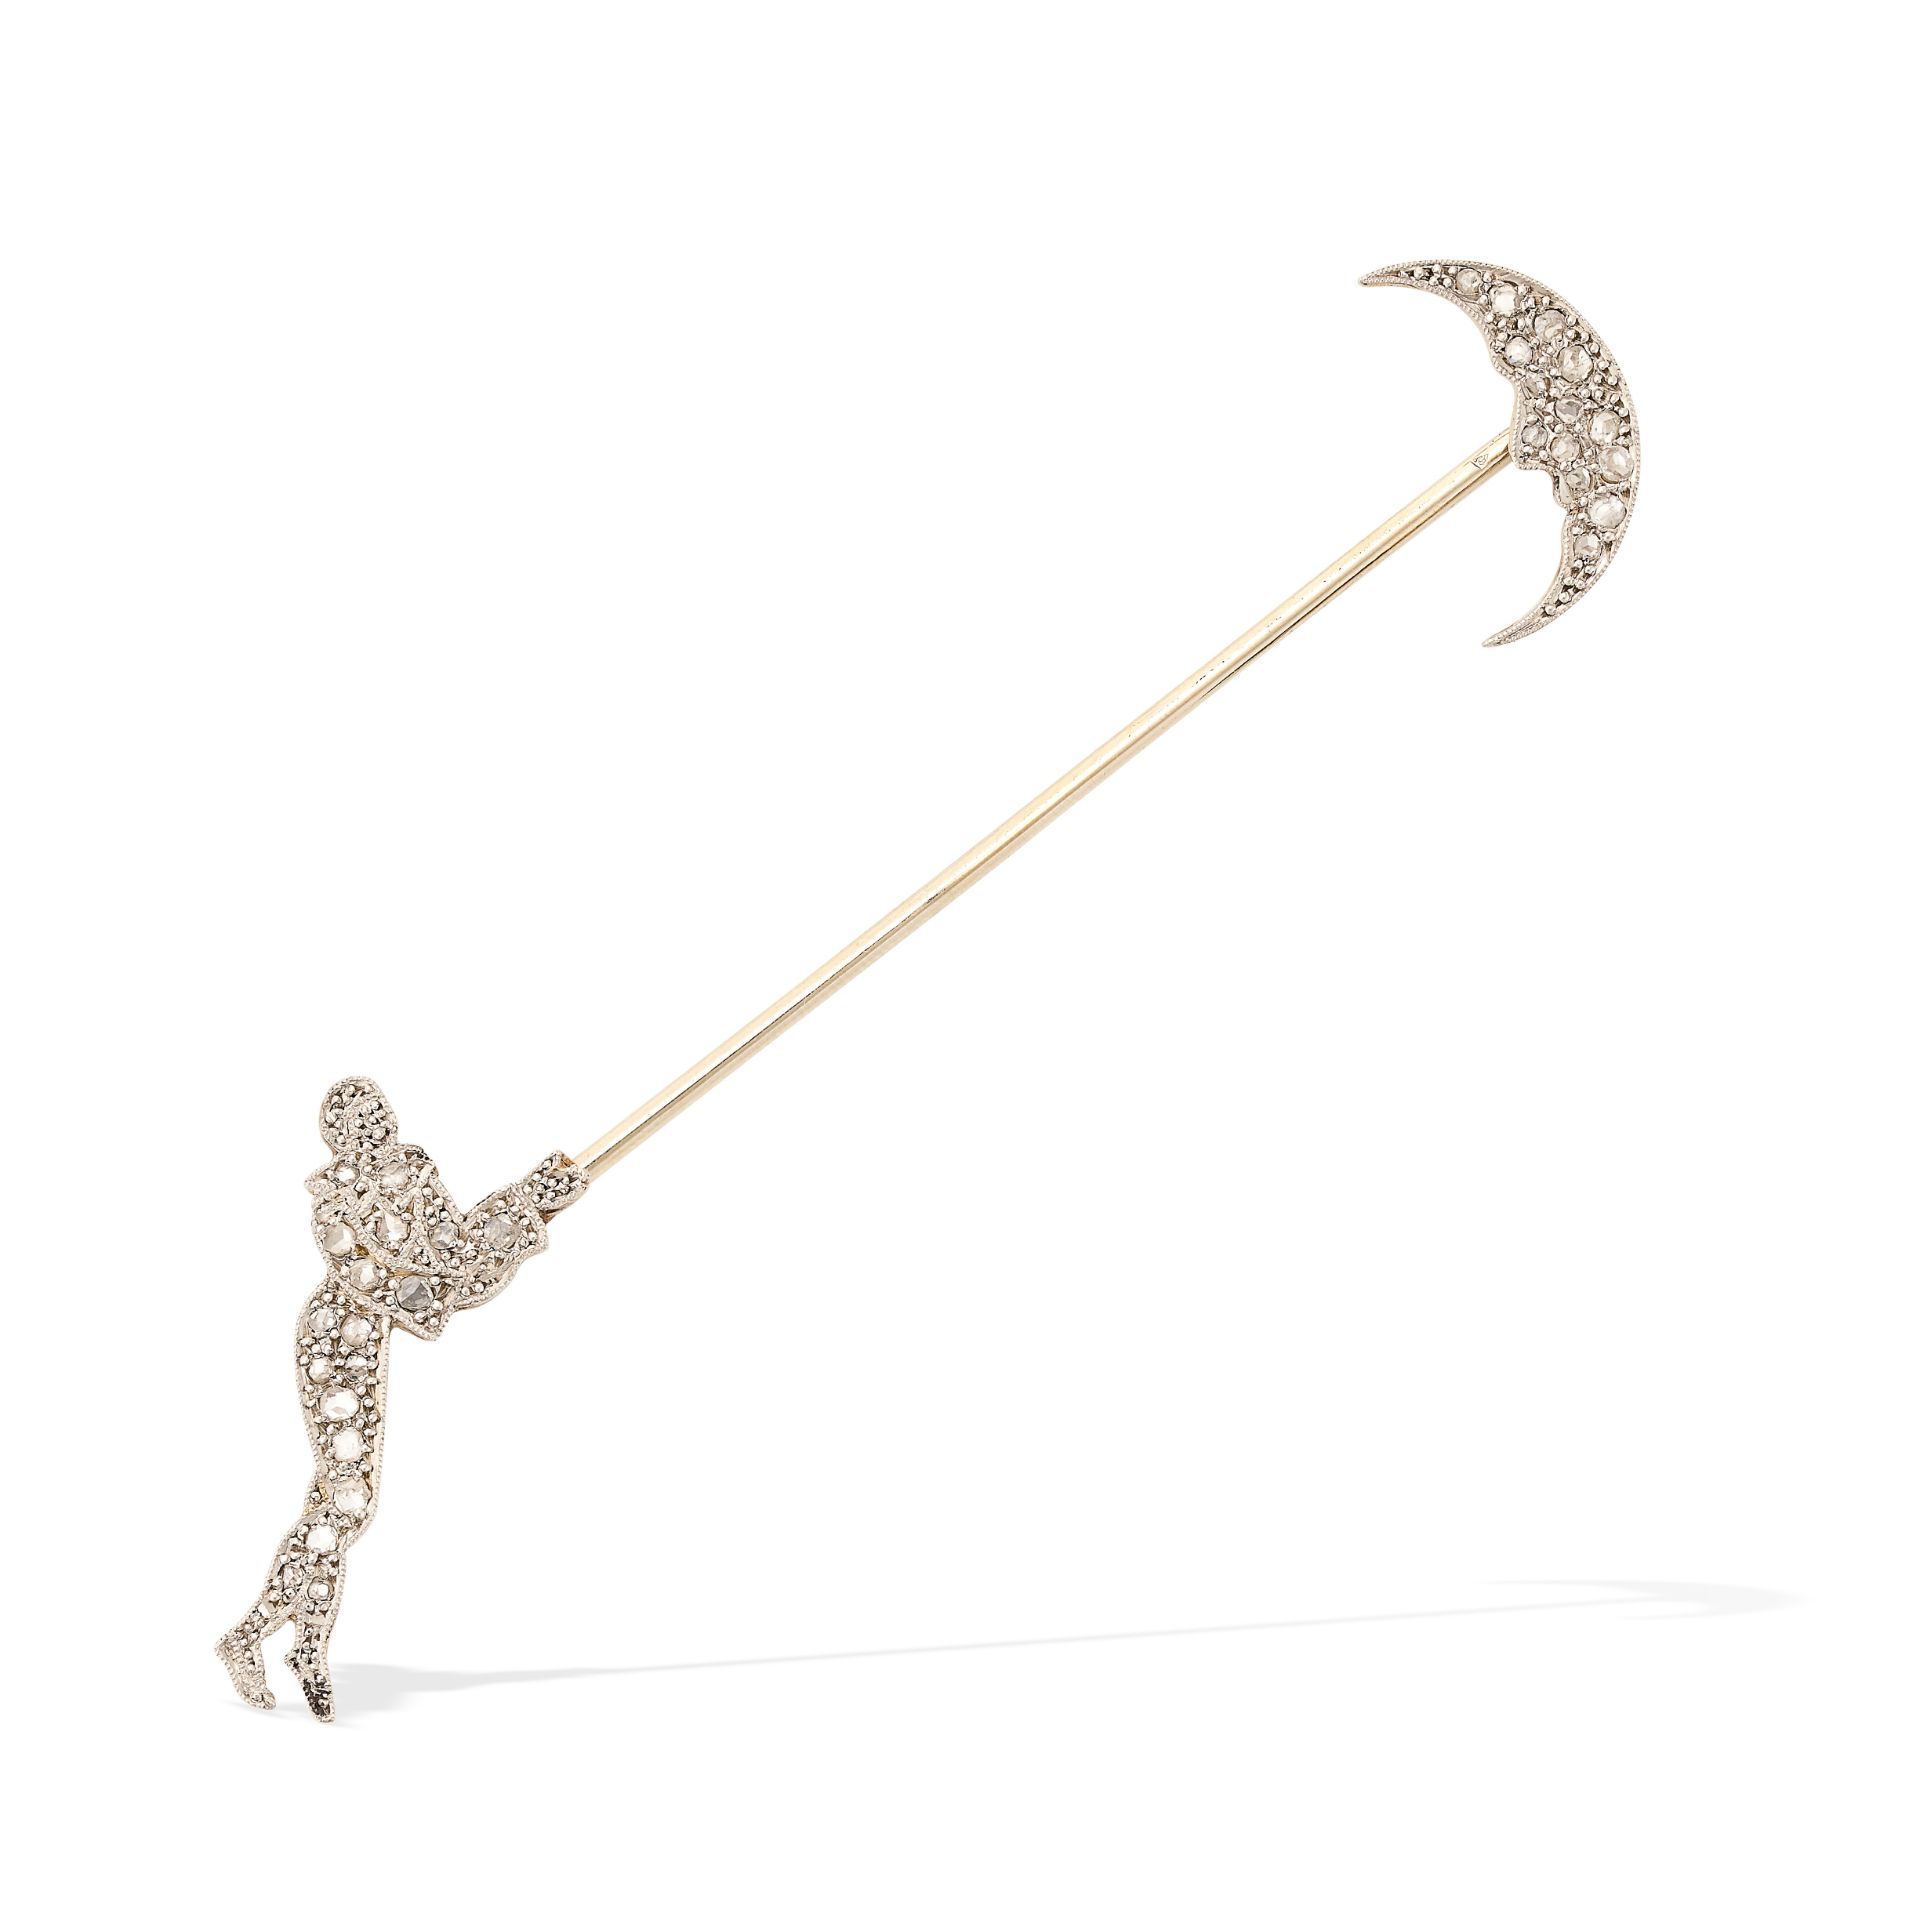 A FRENCH DIAMOND MAN AND THE MOON JABOT PIN in 18ct white gold, depicting a man looking up at the